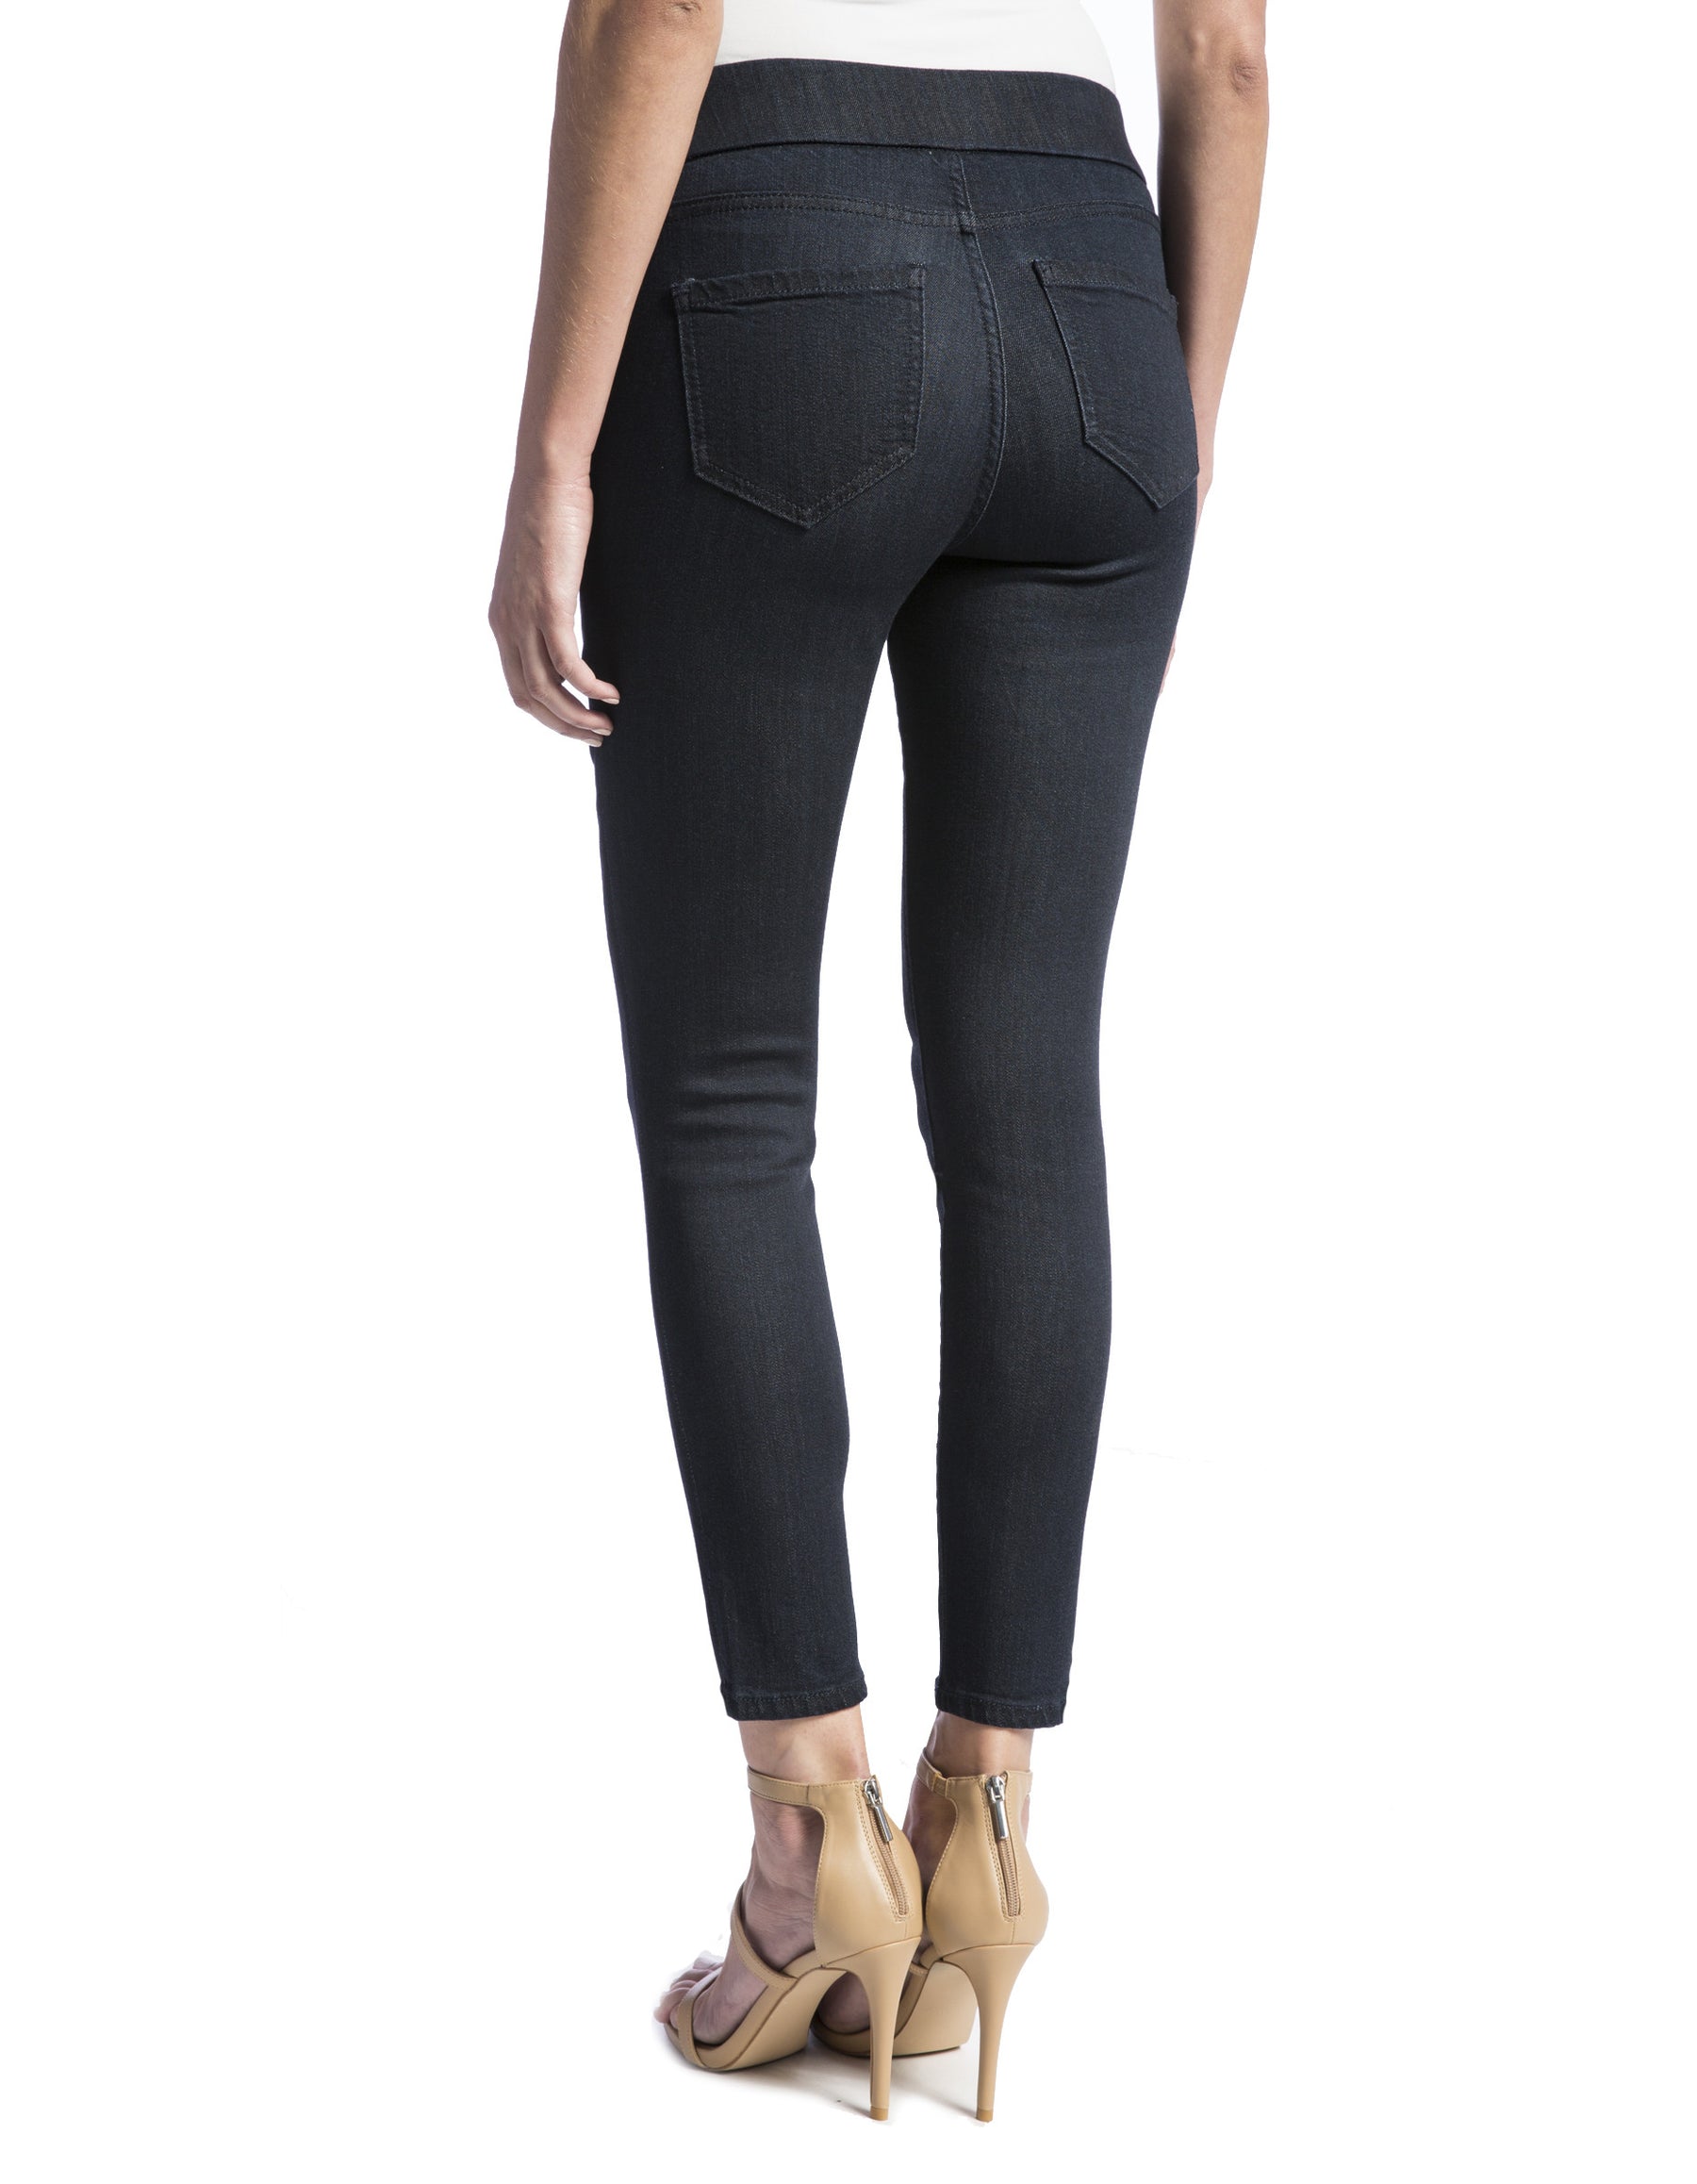 JEANS - SIENNA ANKLE PULL-ON LEGGING | LIVERPOOL JEANS